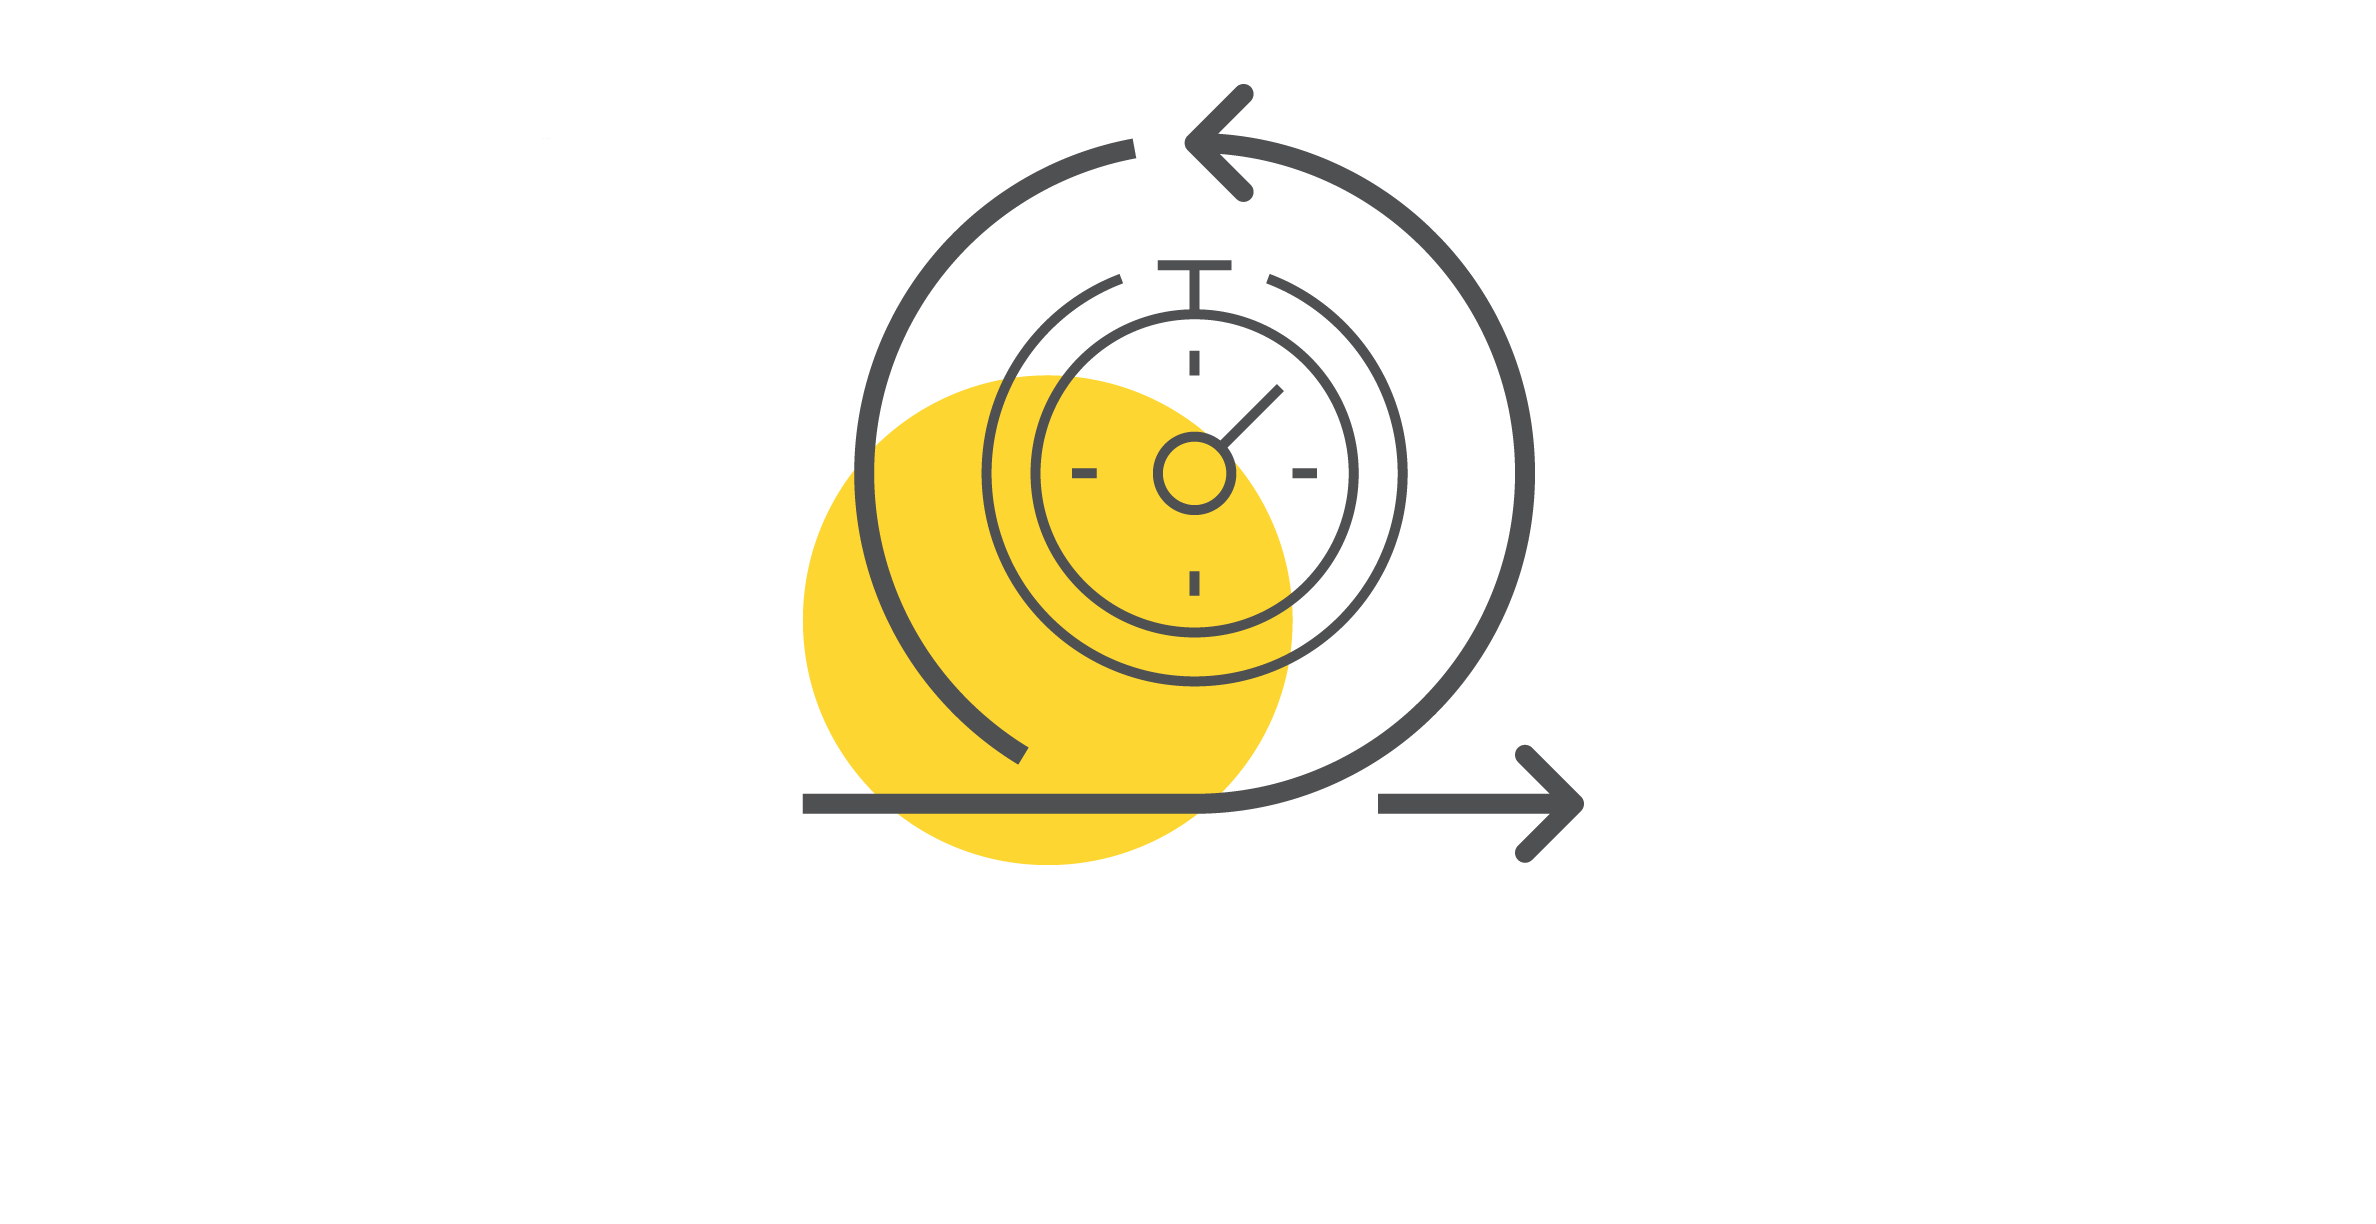 Illustration of agile marketing showing cycles and a clock inside the cycles